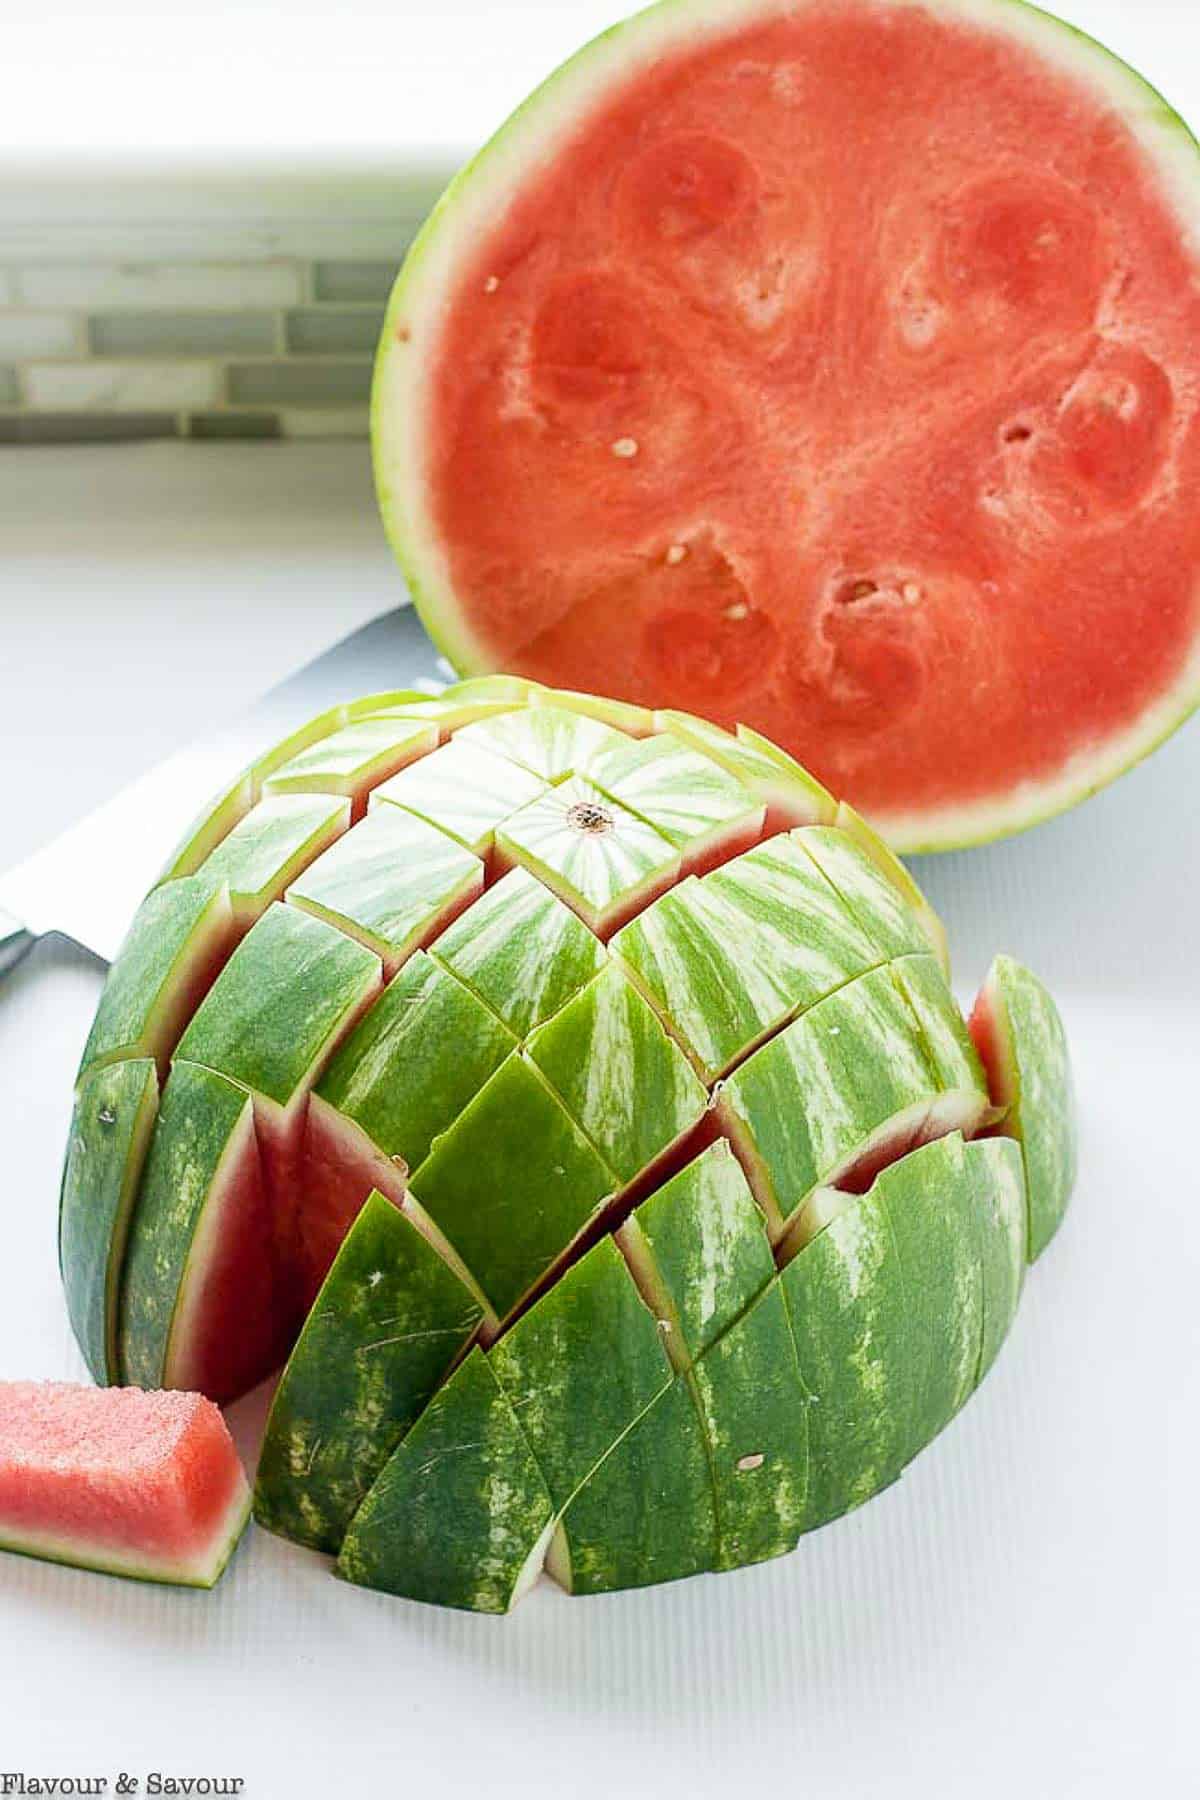 sliced watermelon sticks to form cubes